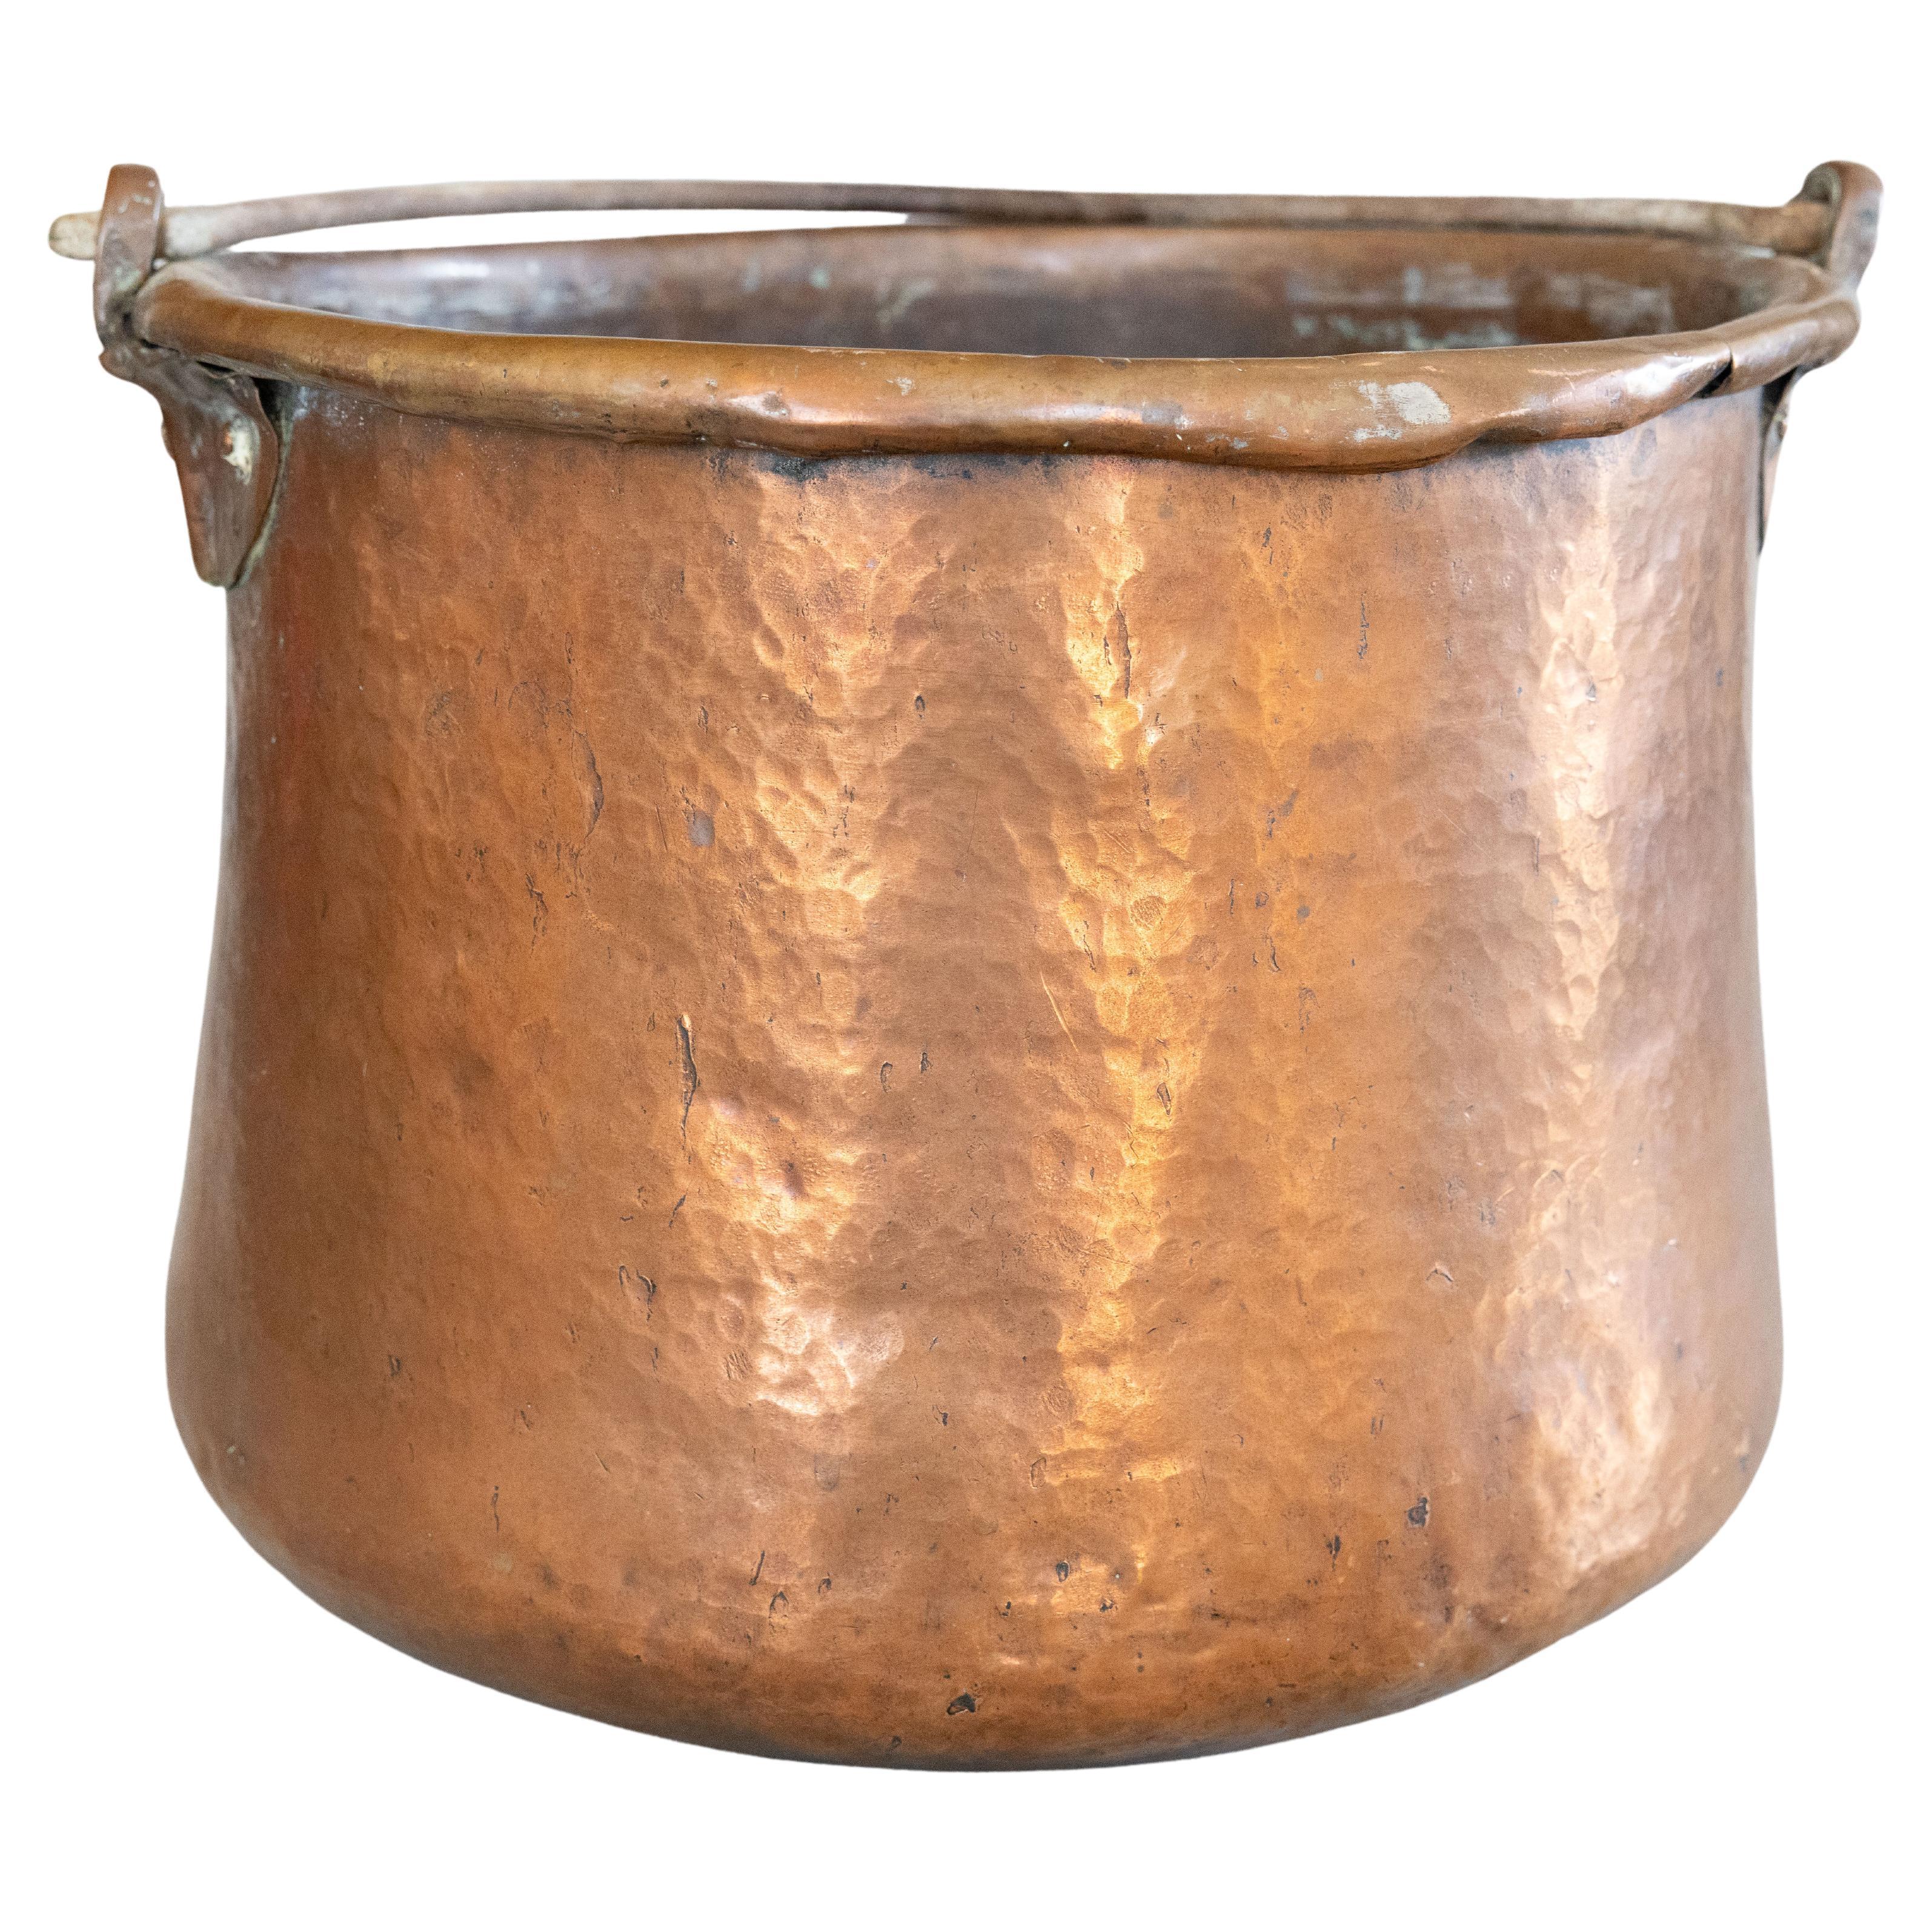 Large 19th Century French Hammered Copper Cauldron Pot